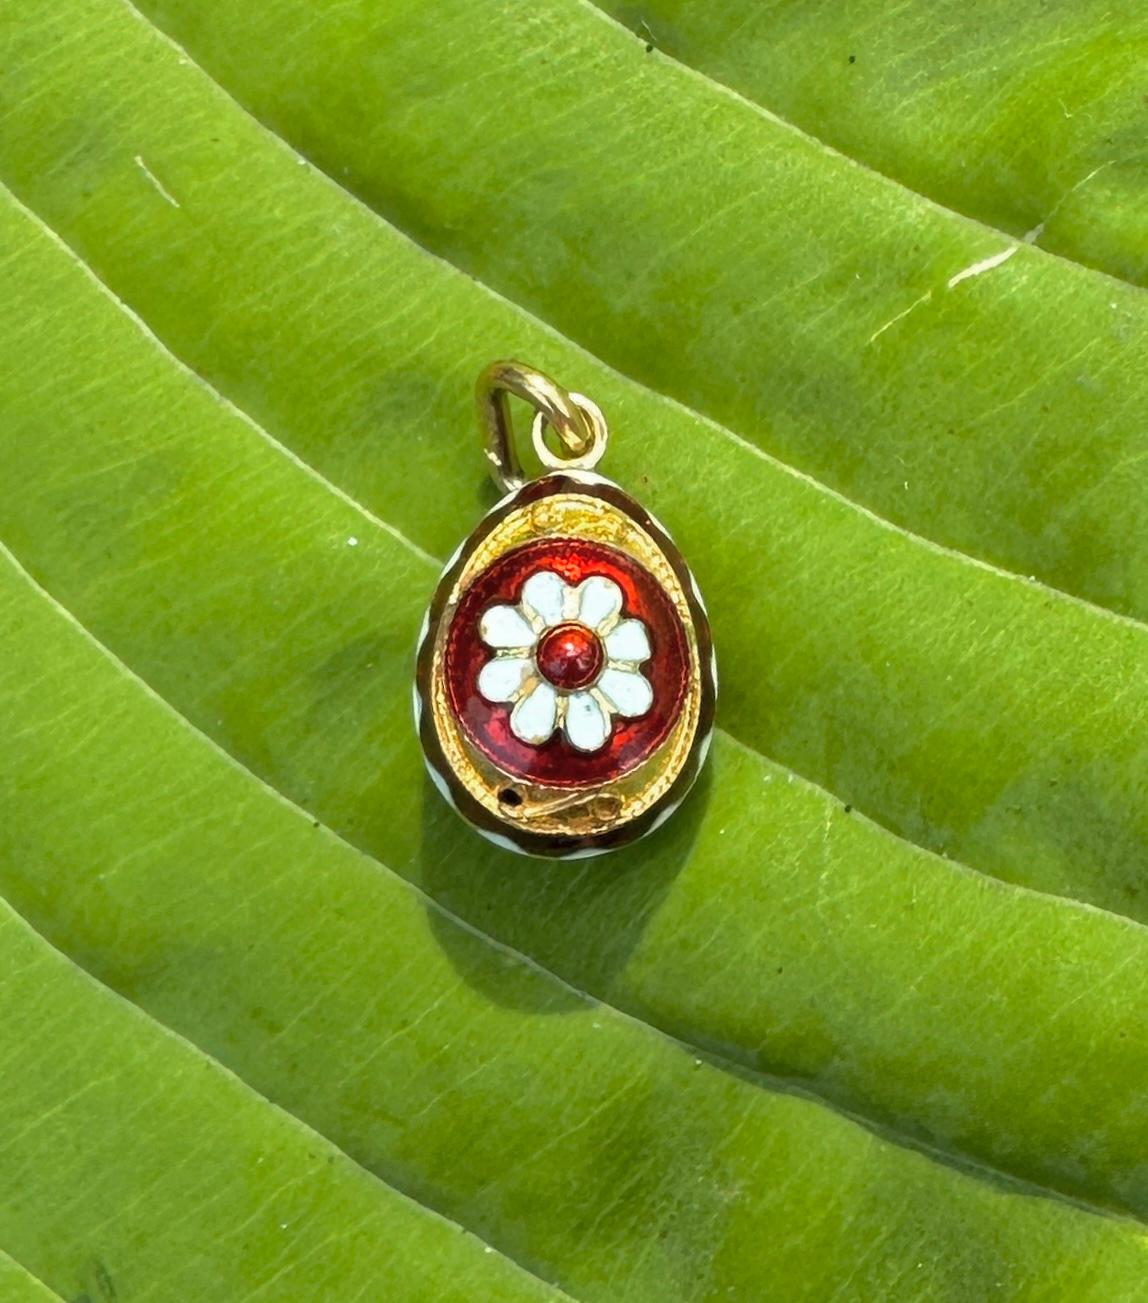 Enamel Easter Egg Pendant Necklace Charm 18 Karat Gold Red White Flower Motif  In Excellent Condition For Sale In New York, NY